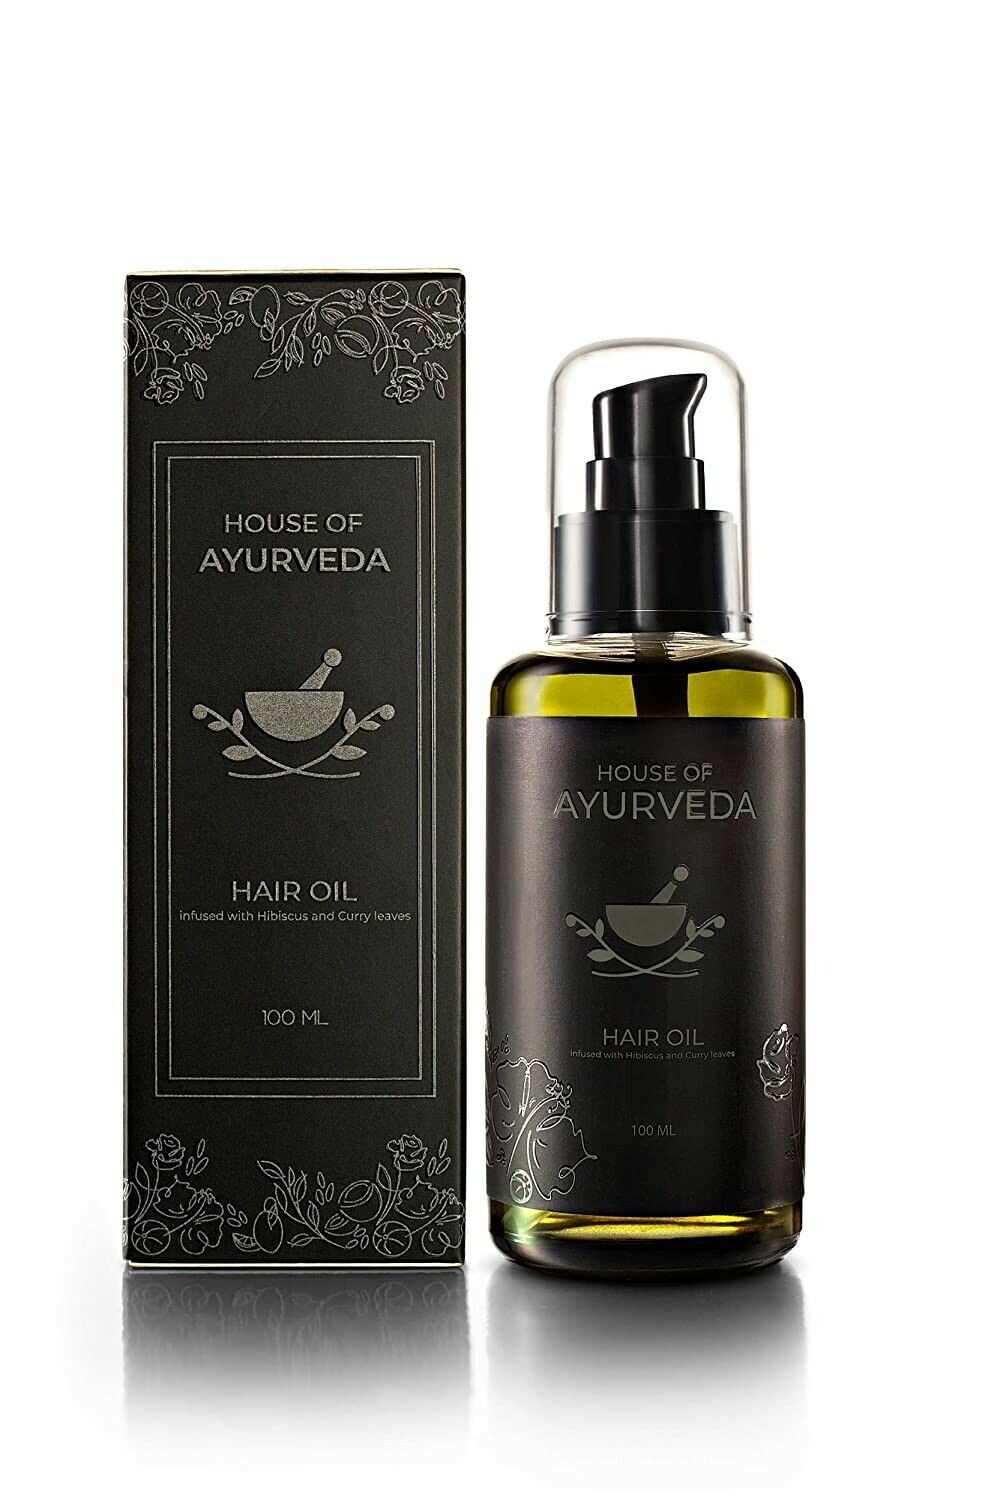 House Of Ayurveda Hibiscus and Curry leaves Hair Oil 100ml